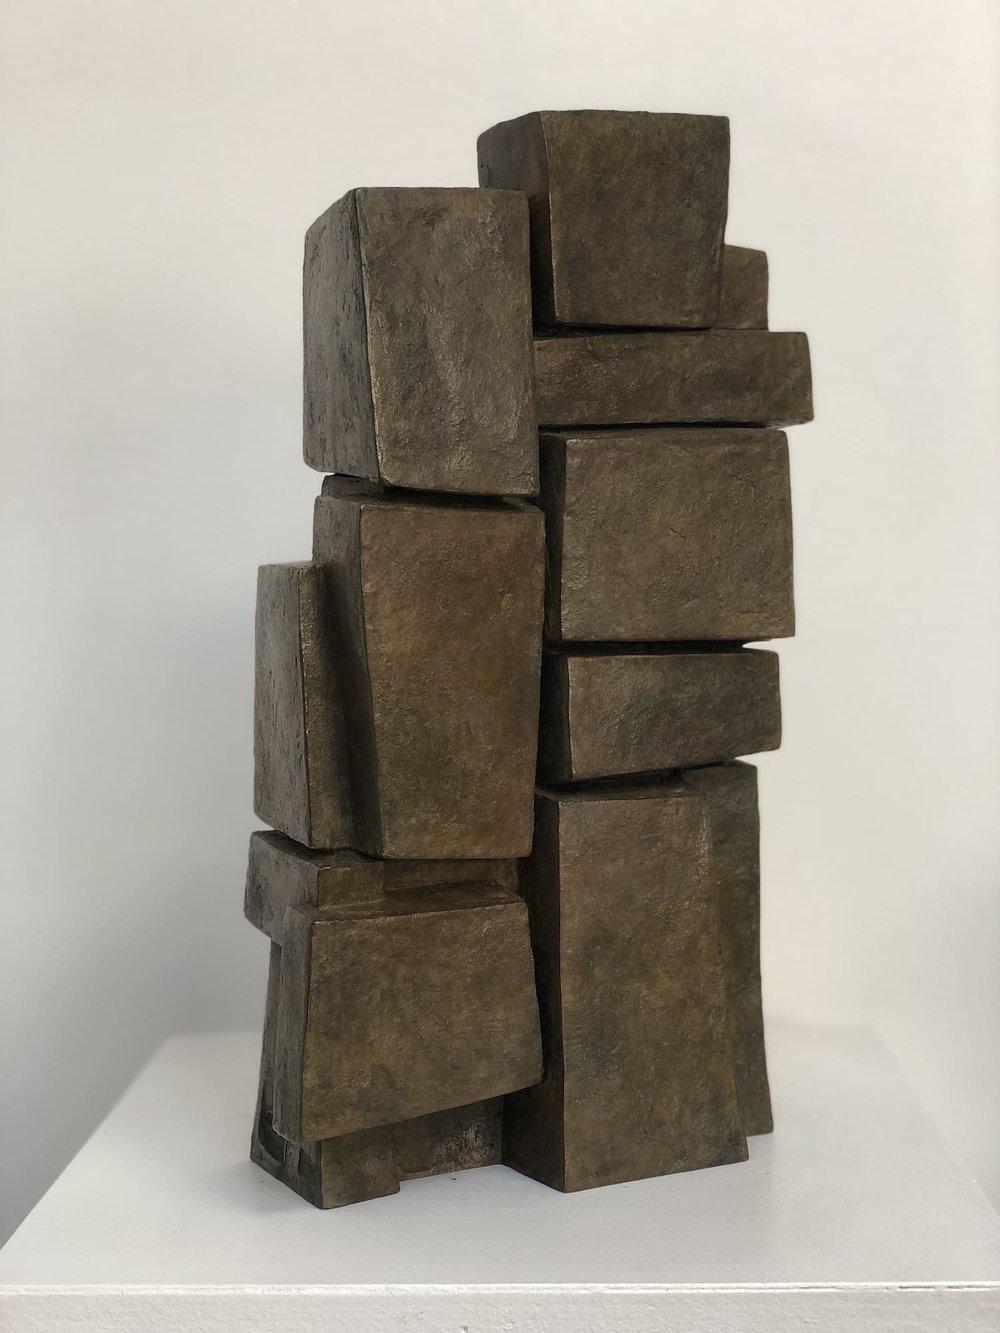 Unity I, Bronze by French contemporary artist Delphine Brabant. 
Bronze sculpture, 31 cm × 21 cm × 10 cm. Limited edition of 8 + 4 A.P.

Fascinated with the concept of construction, Delphine Brabant composes her abstract sculptures like an